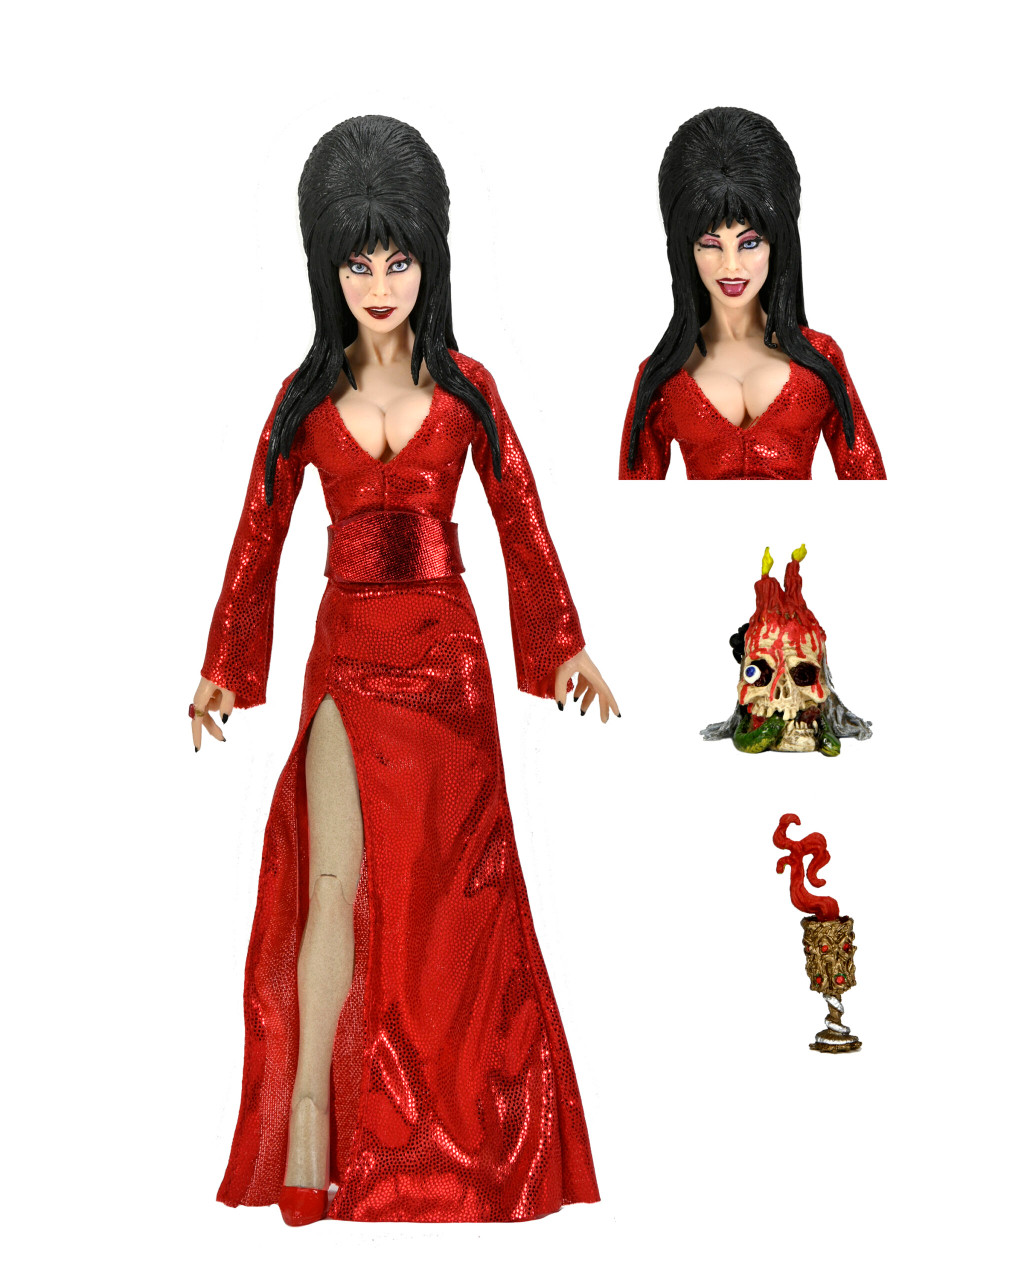 NECA 8" Cassandra Peterson as Elvira “Red, Fright, and Boo” Action Figure 56080 2